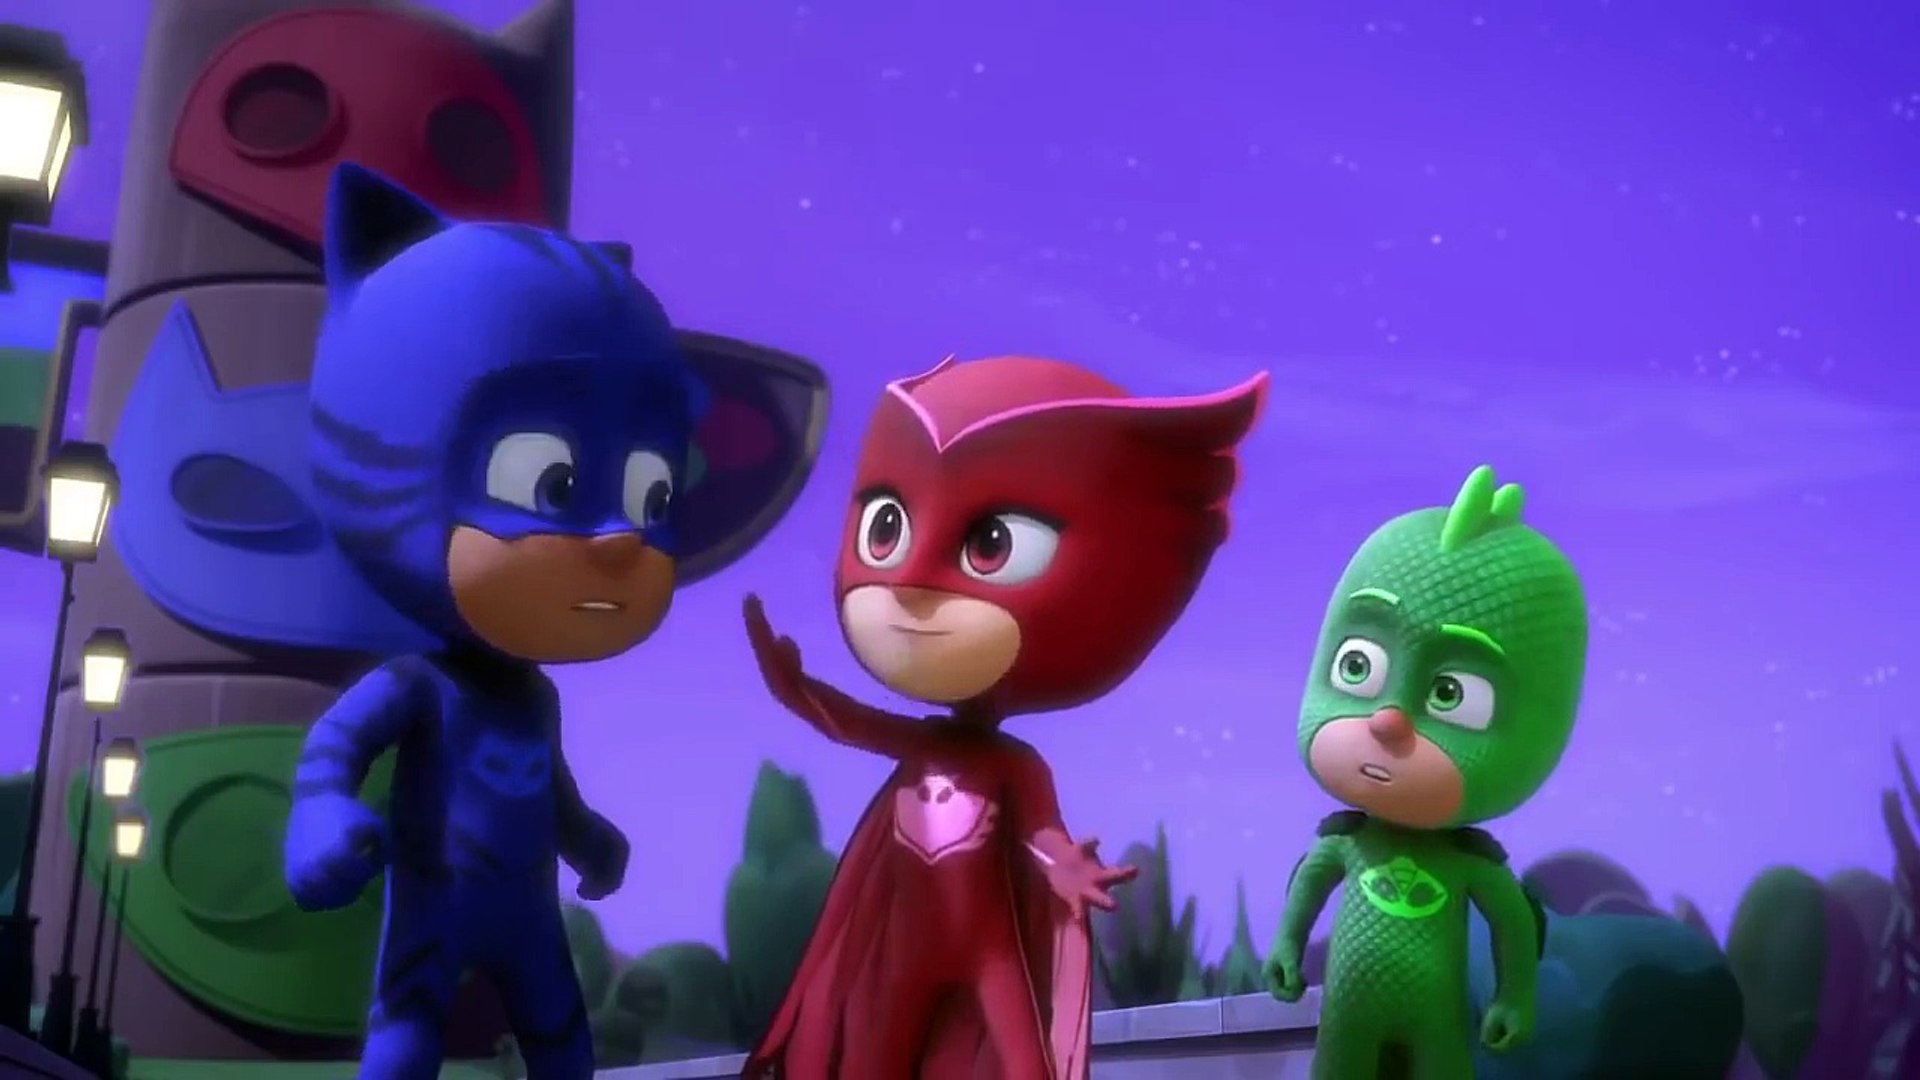 Pj Masks Full Episodes Catboy And The Lunar Dome Gekko And The Rock Disney Junior Dailymotion Video